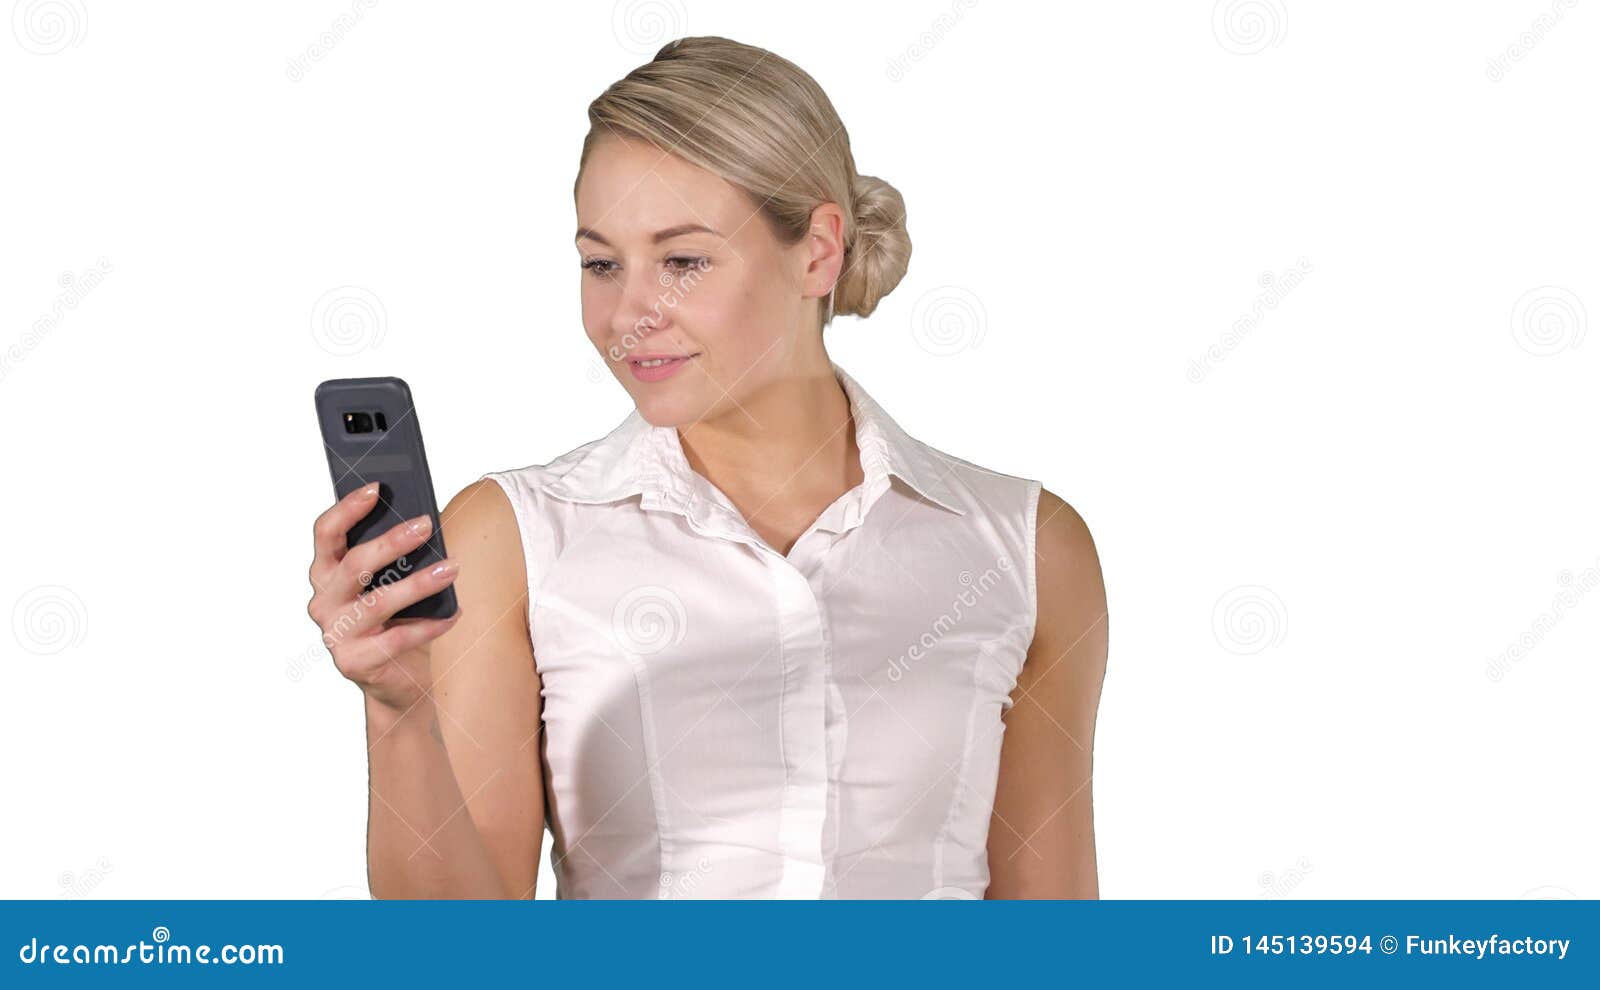 Medium shot. Young girl reading from mobile phone screen on white background. Professional shot in 4K resolution. 005. You can use it e.g. in your commercial video, business, presentation, broadcast